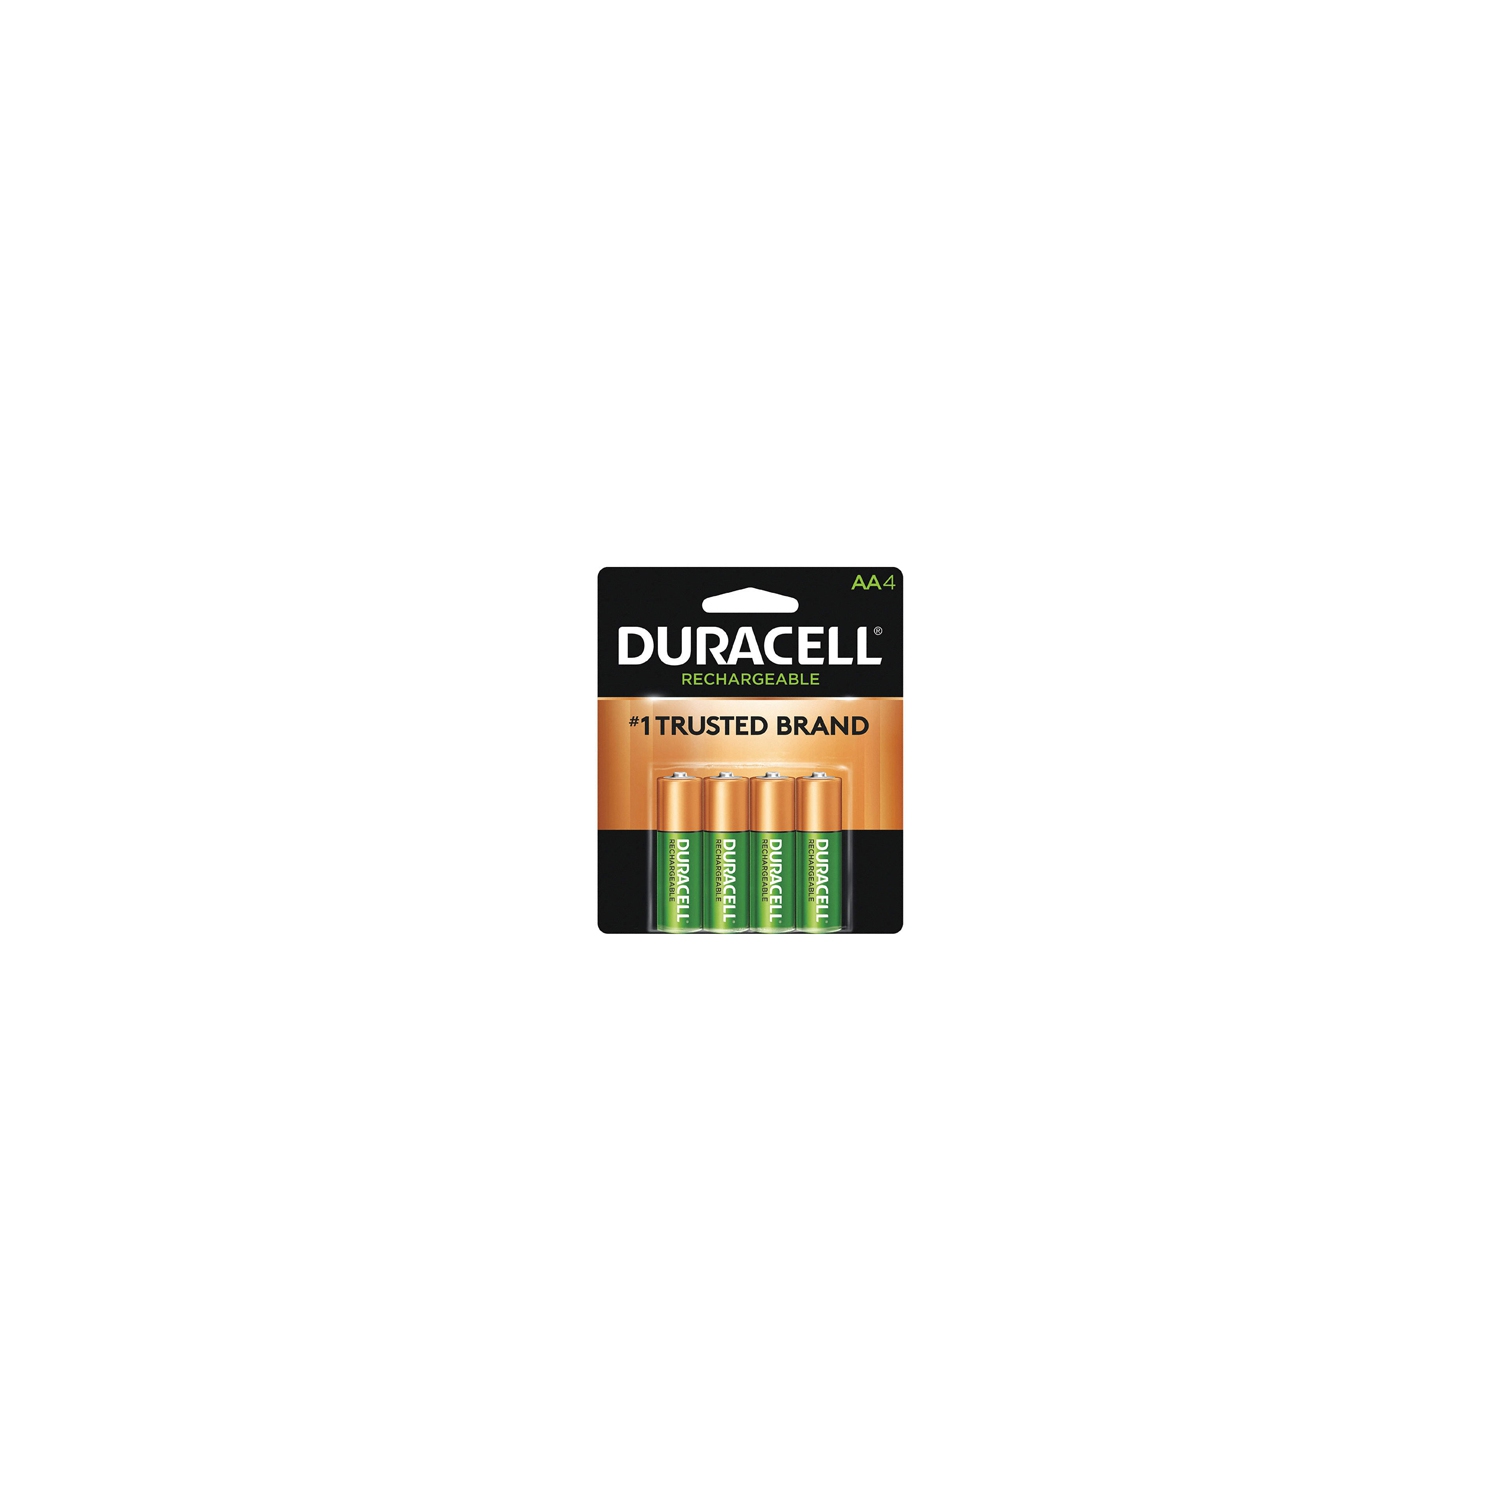 4 x AA Duracell Rechargeable (DX1500) Batteries (2500 mAh)